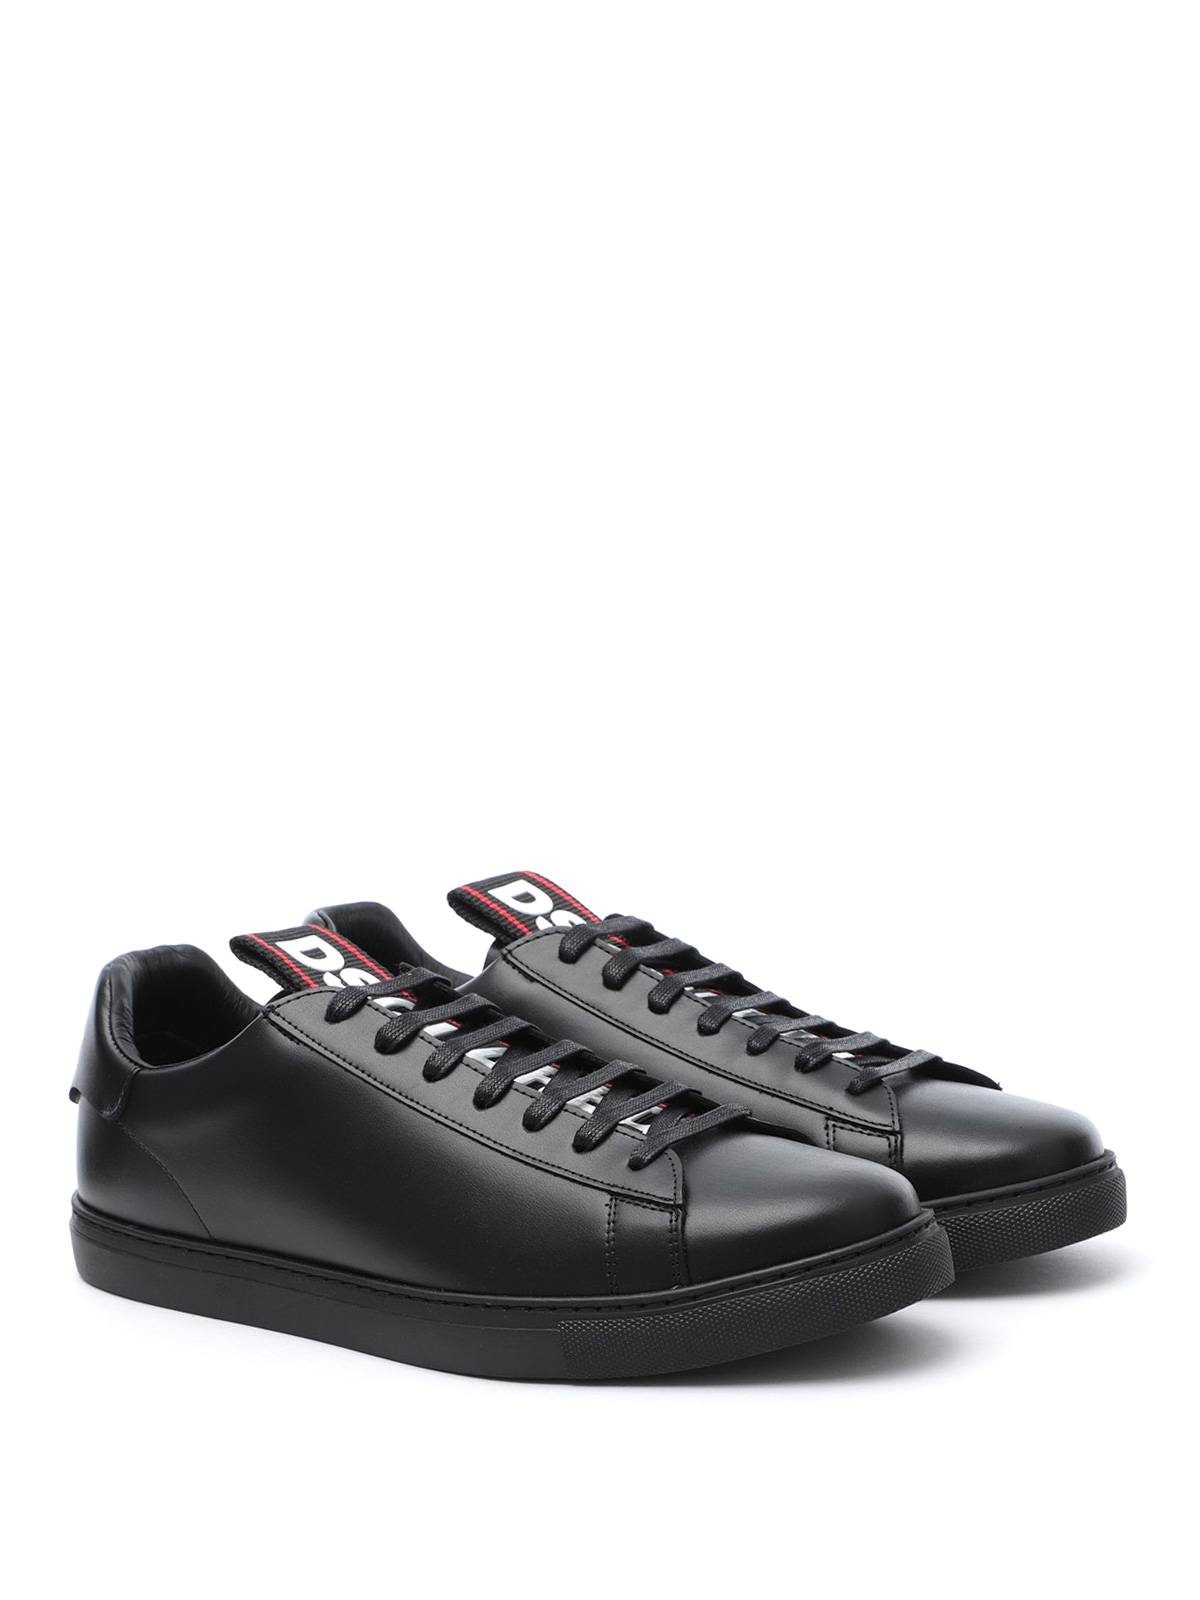 DSQUARED2 Evolution Tape Low Top Sneaker